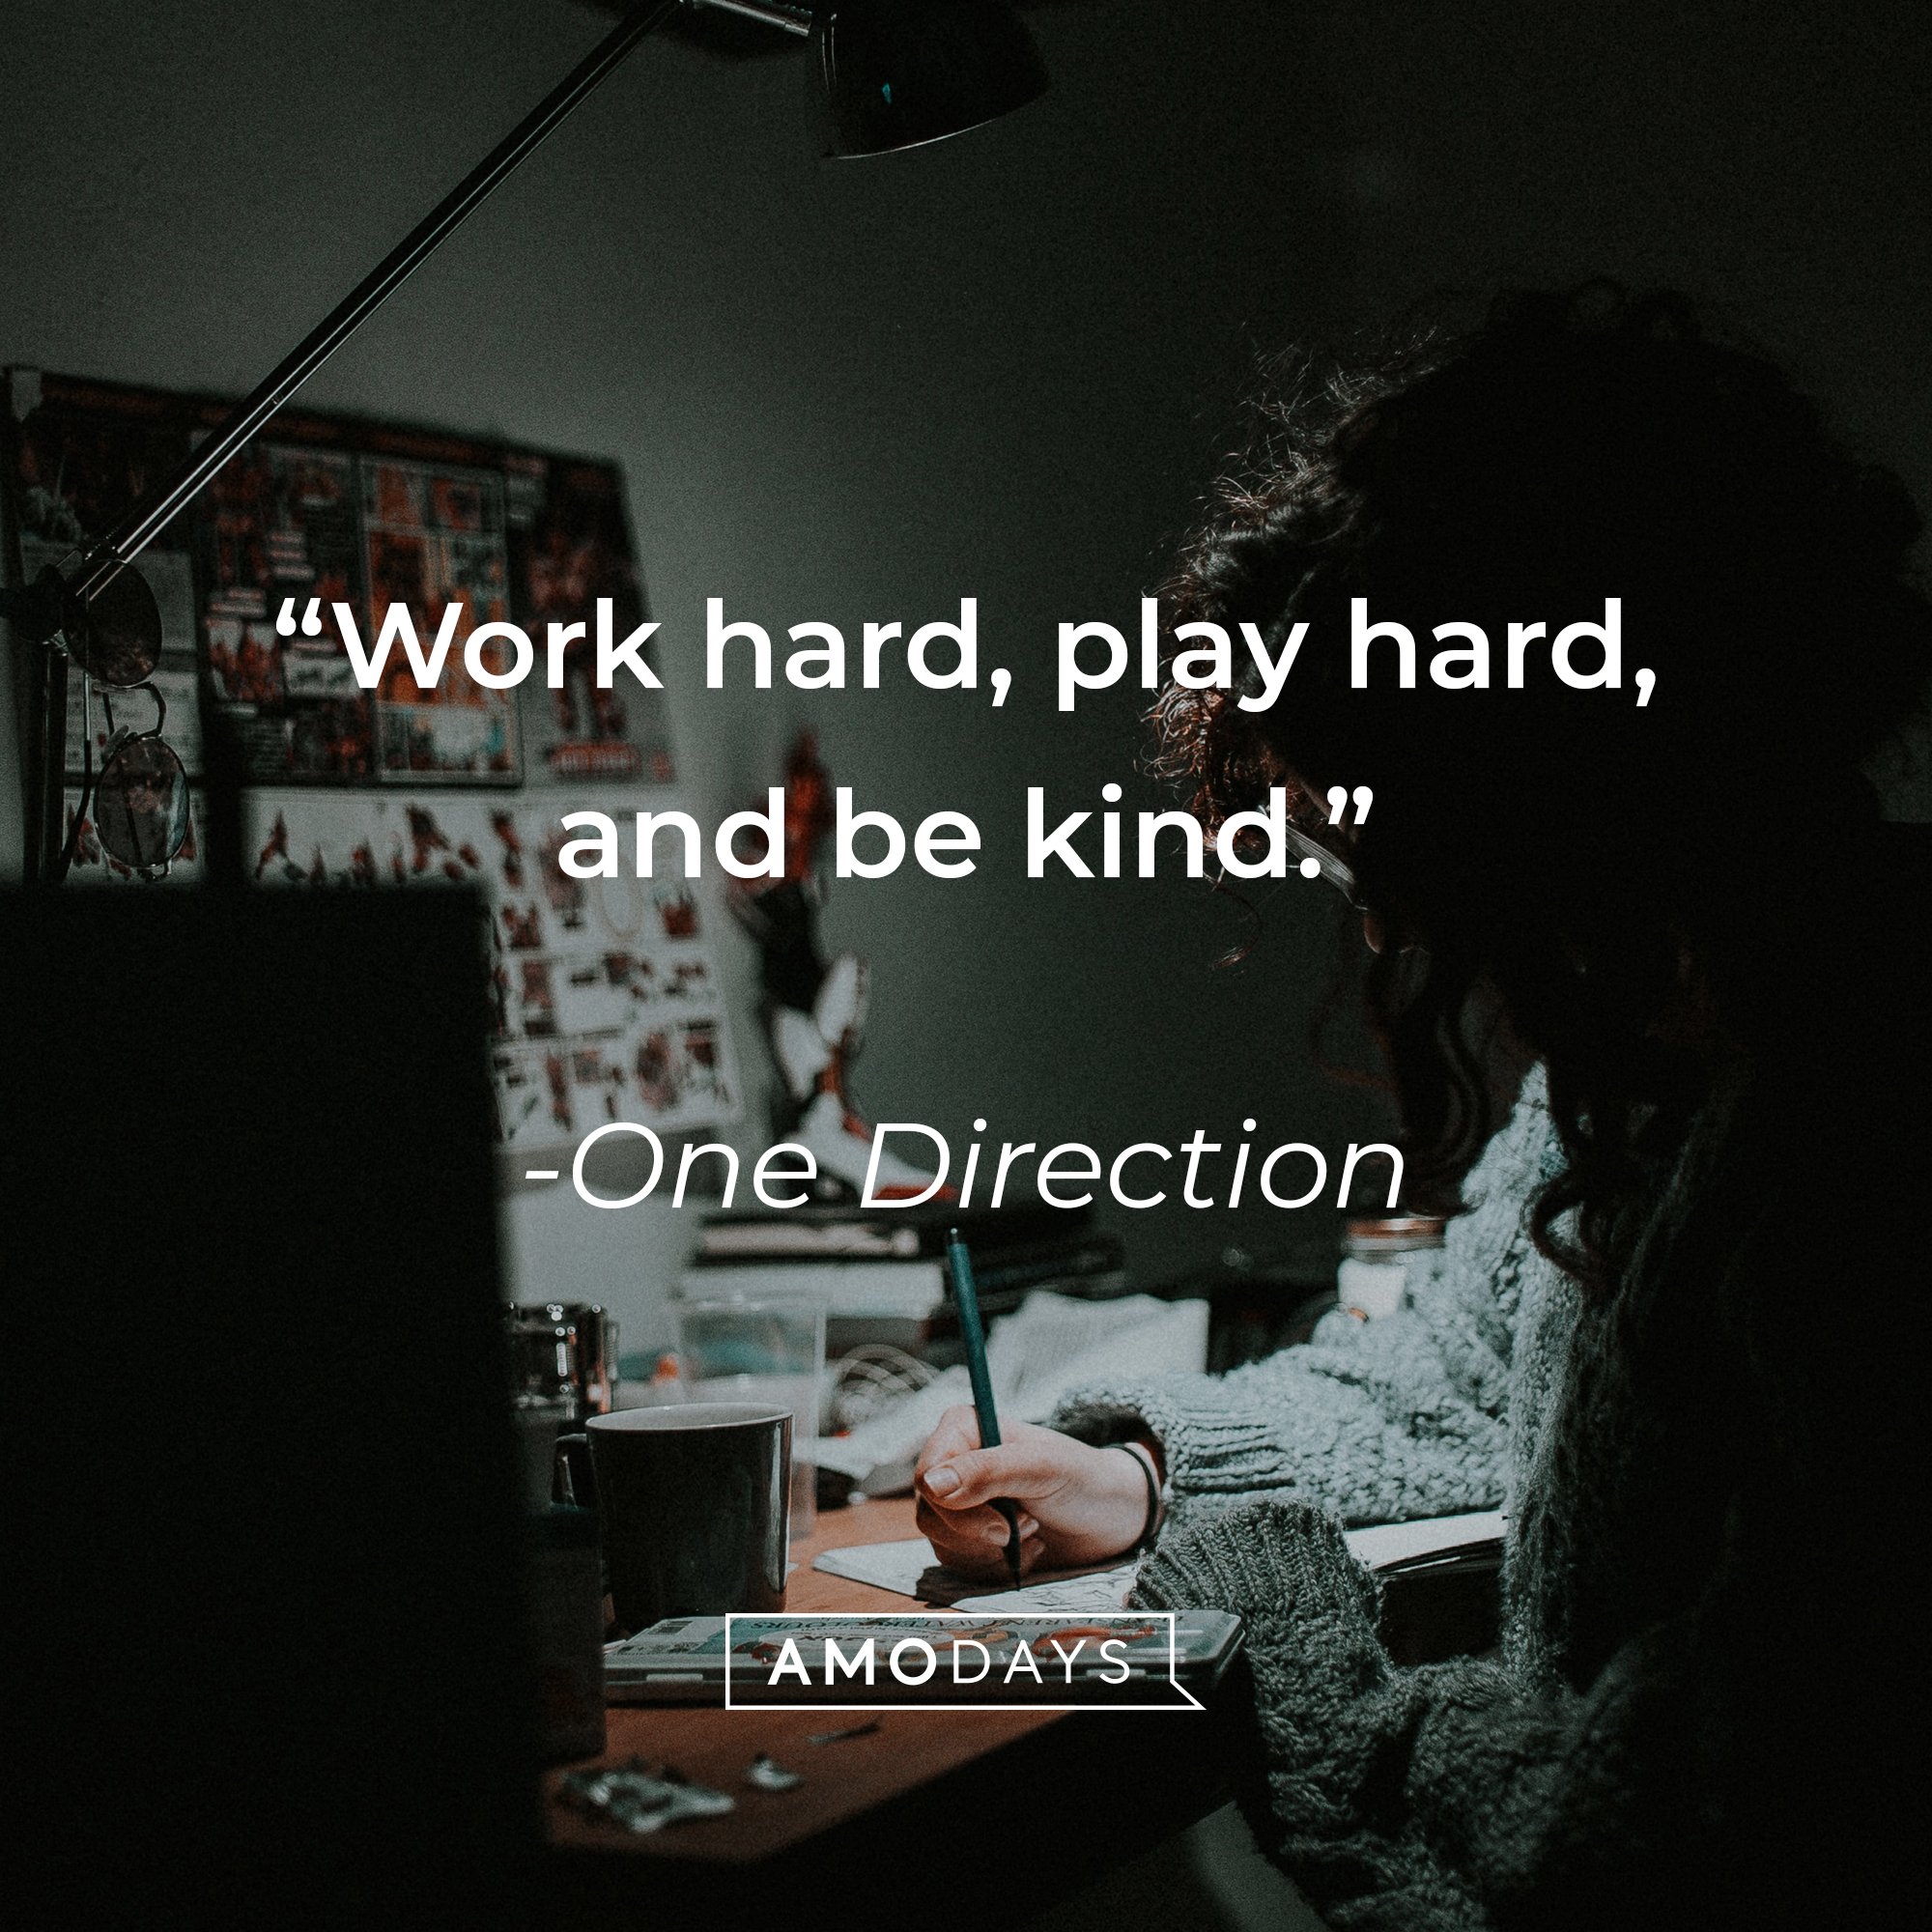 One Direction's quote: "Work hard, play hard, and be kind." | Image: AmoDays